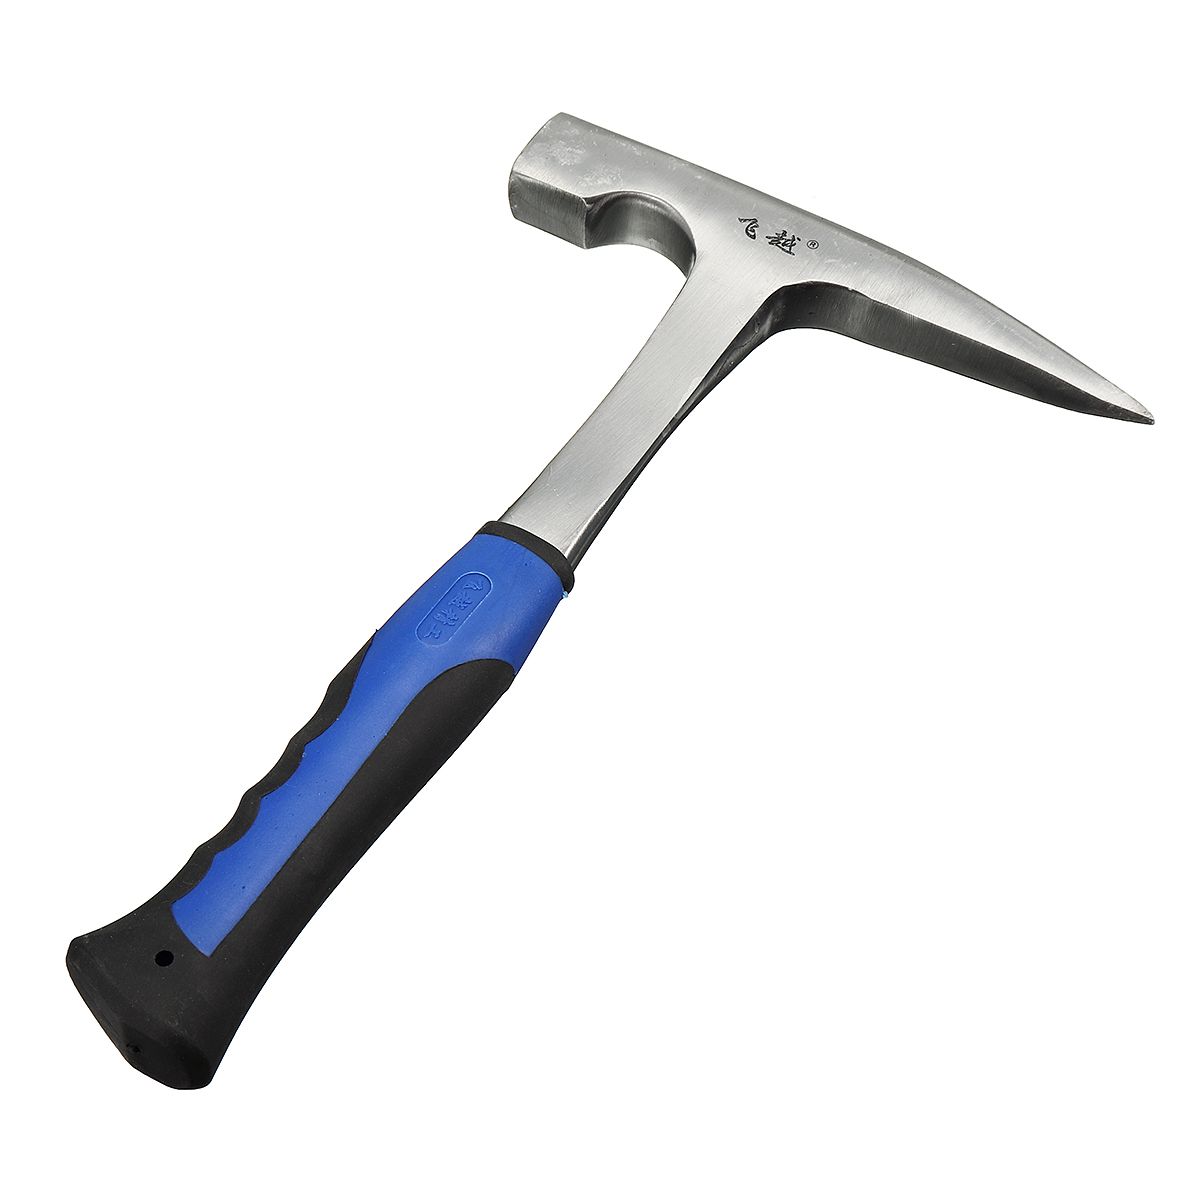 Flat-Pointed-Hammers-Shock-Reduction-Grip-Geology-Prospecting-Mine-Exploration-Tool-1360507